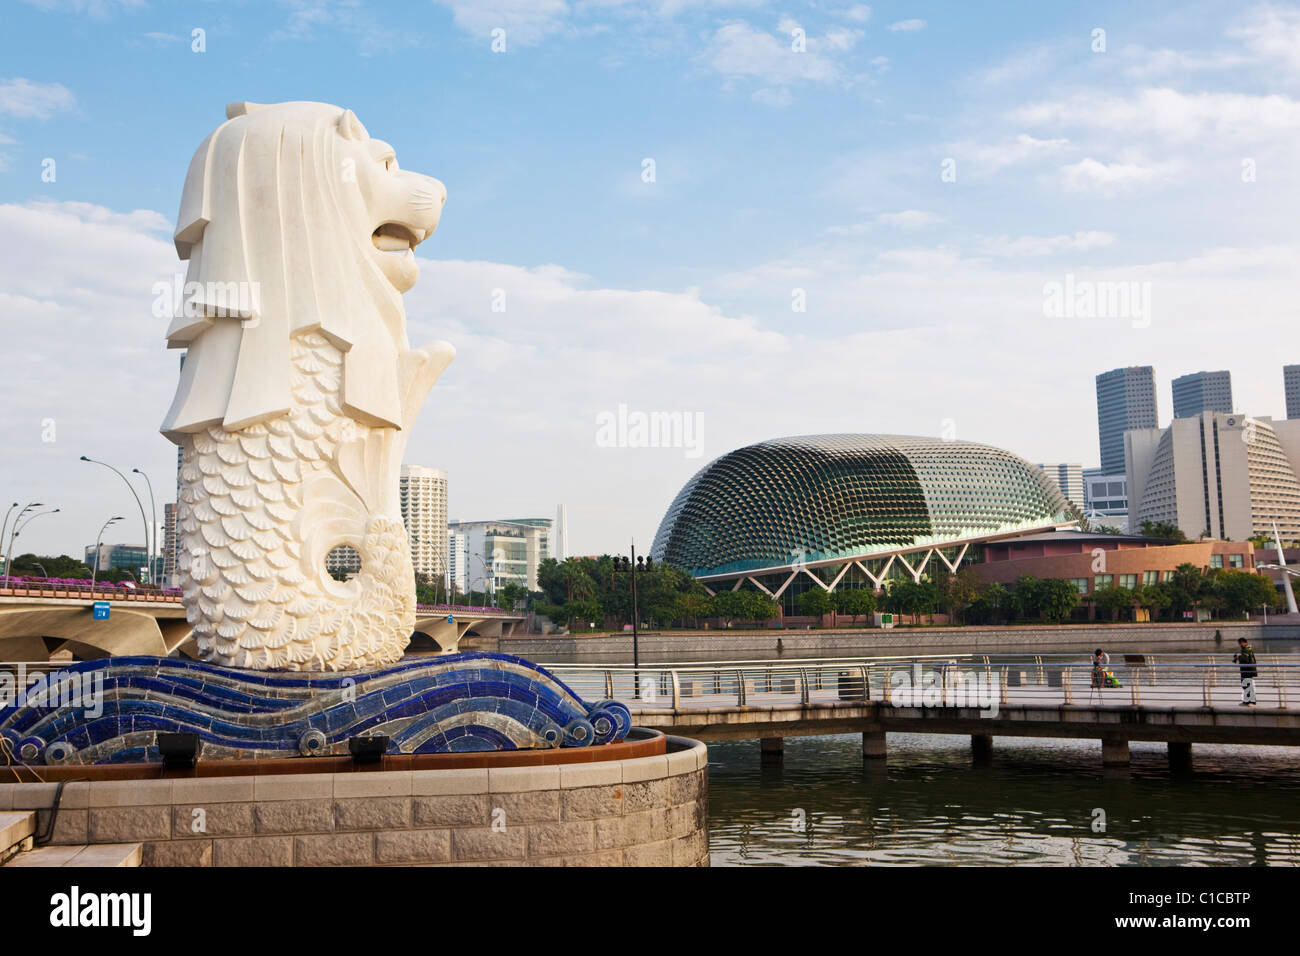 The Merlion Statue with the Esplanade - Theatres on the Bay building in the background, Marina Bay, Singapore Stock Photo